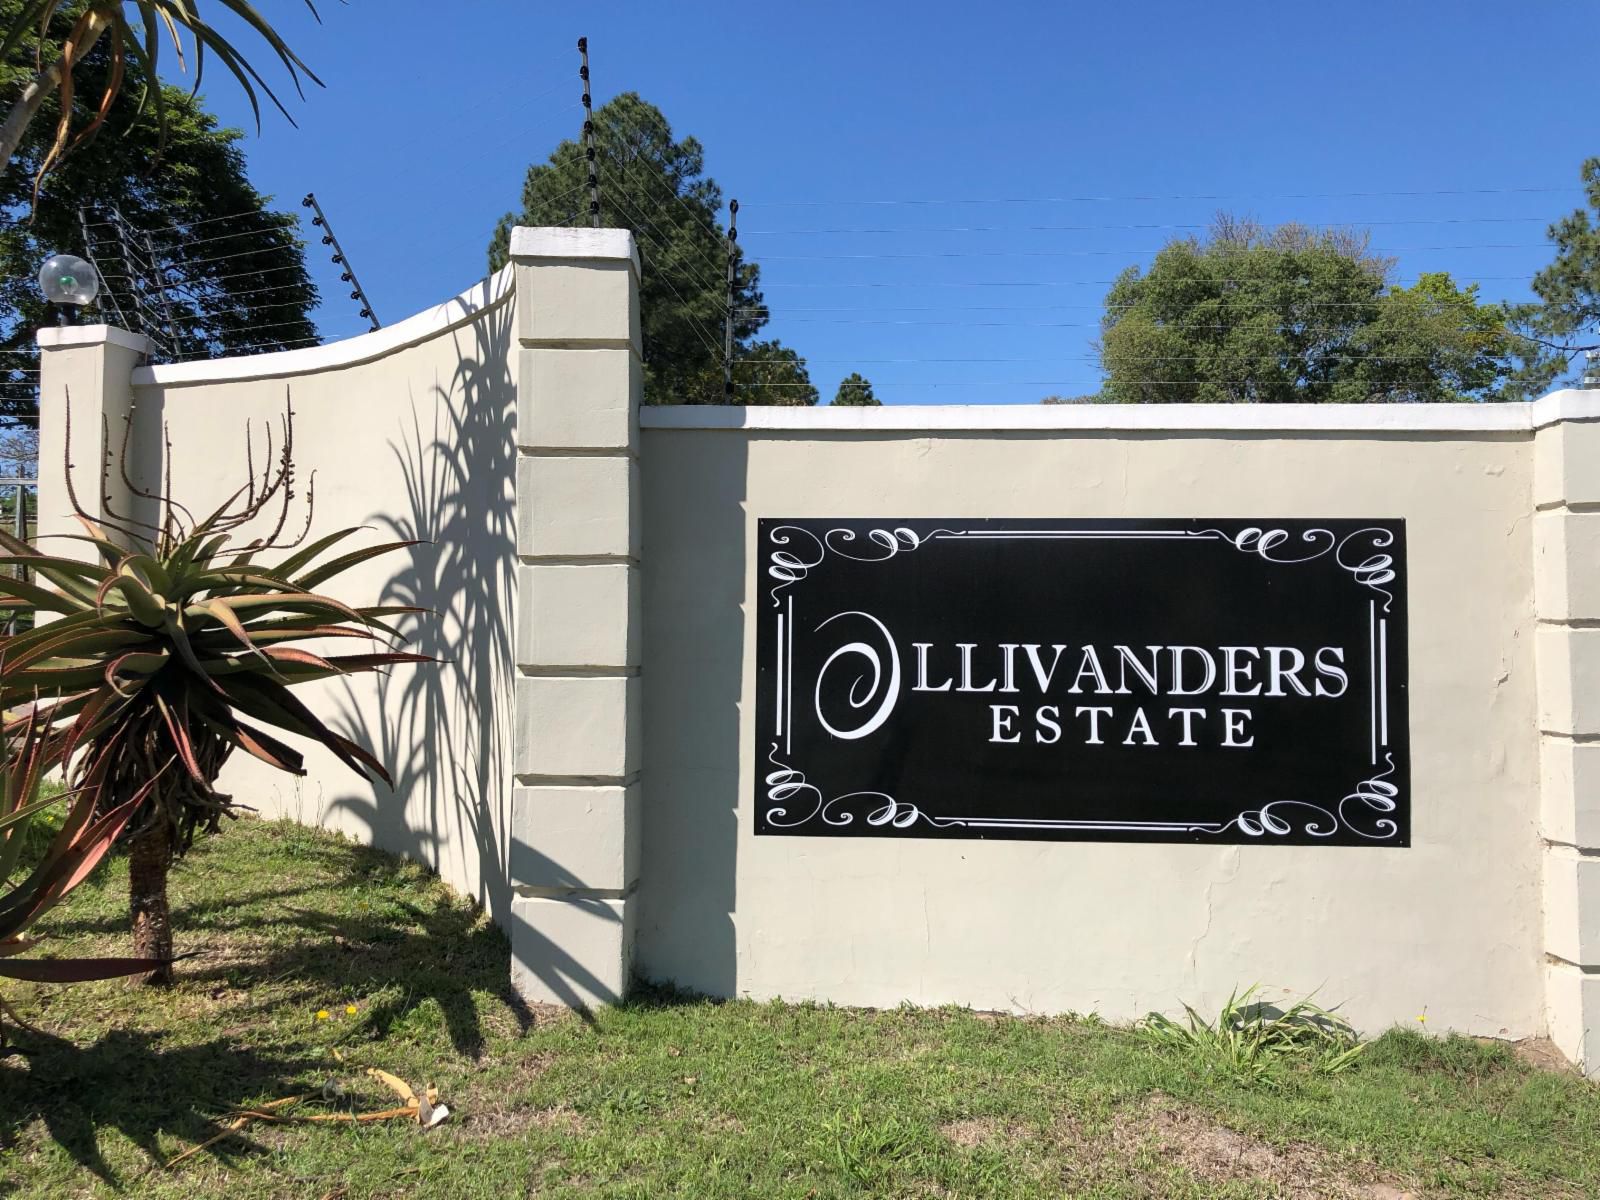 Ollivanders Estate Summerveld Durban Kwazulu Natal South Africa Complementary Colors, House, Building, Architecture, Palm Tree, Plant, Nature, Wood, Sign, Text